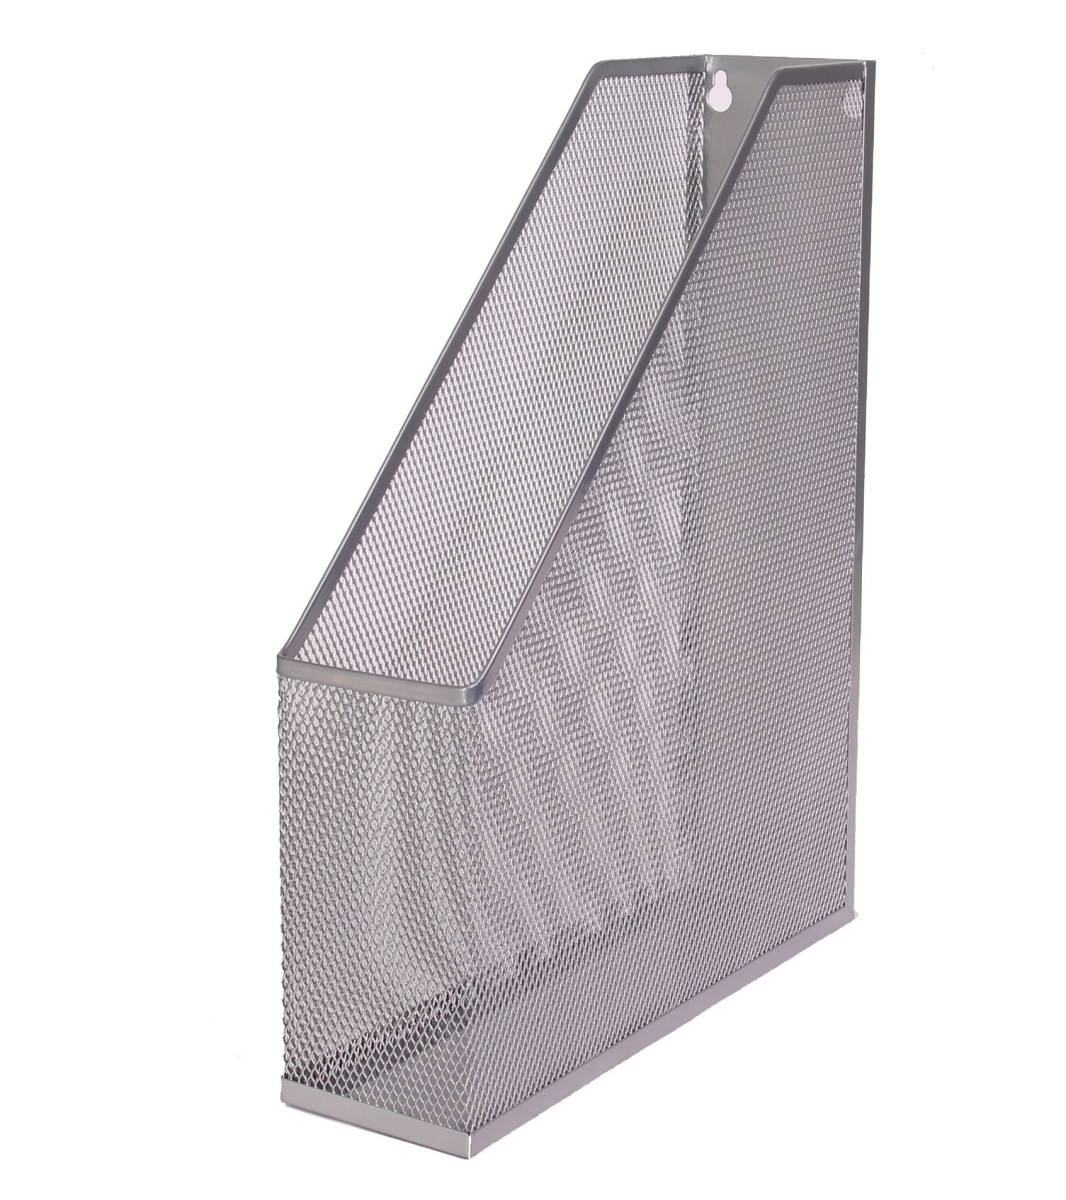 1111vc Mesh Steel Wall Mount Hanging Or Desktop Magazine Document Letter Mail File Holder, Silver - 12 X 3 X 10 In.